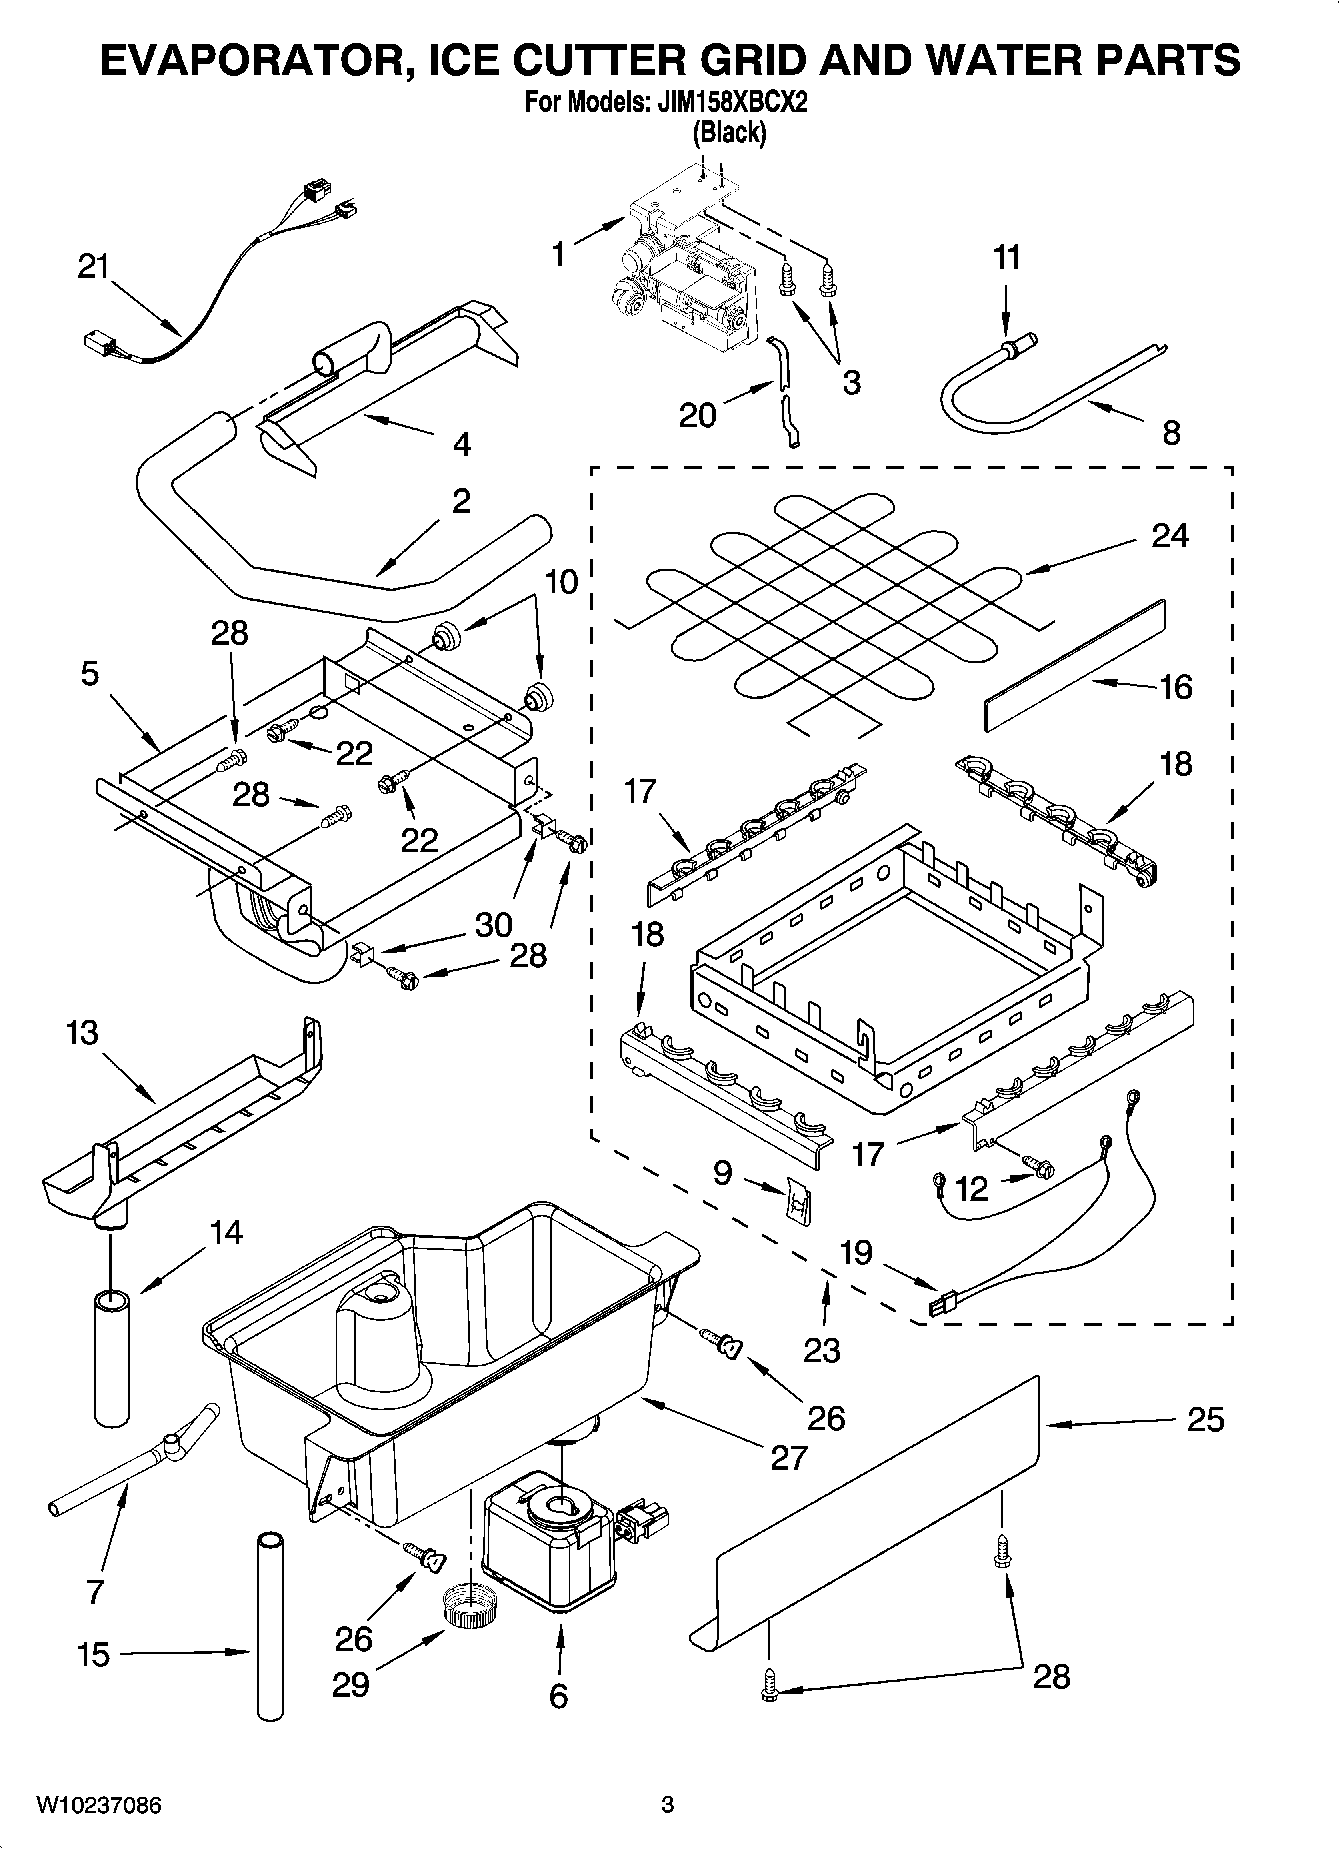 02 - EVAPORATOR, ICE CUTTER GRID AND WATER PARTS